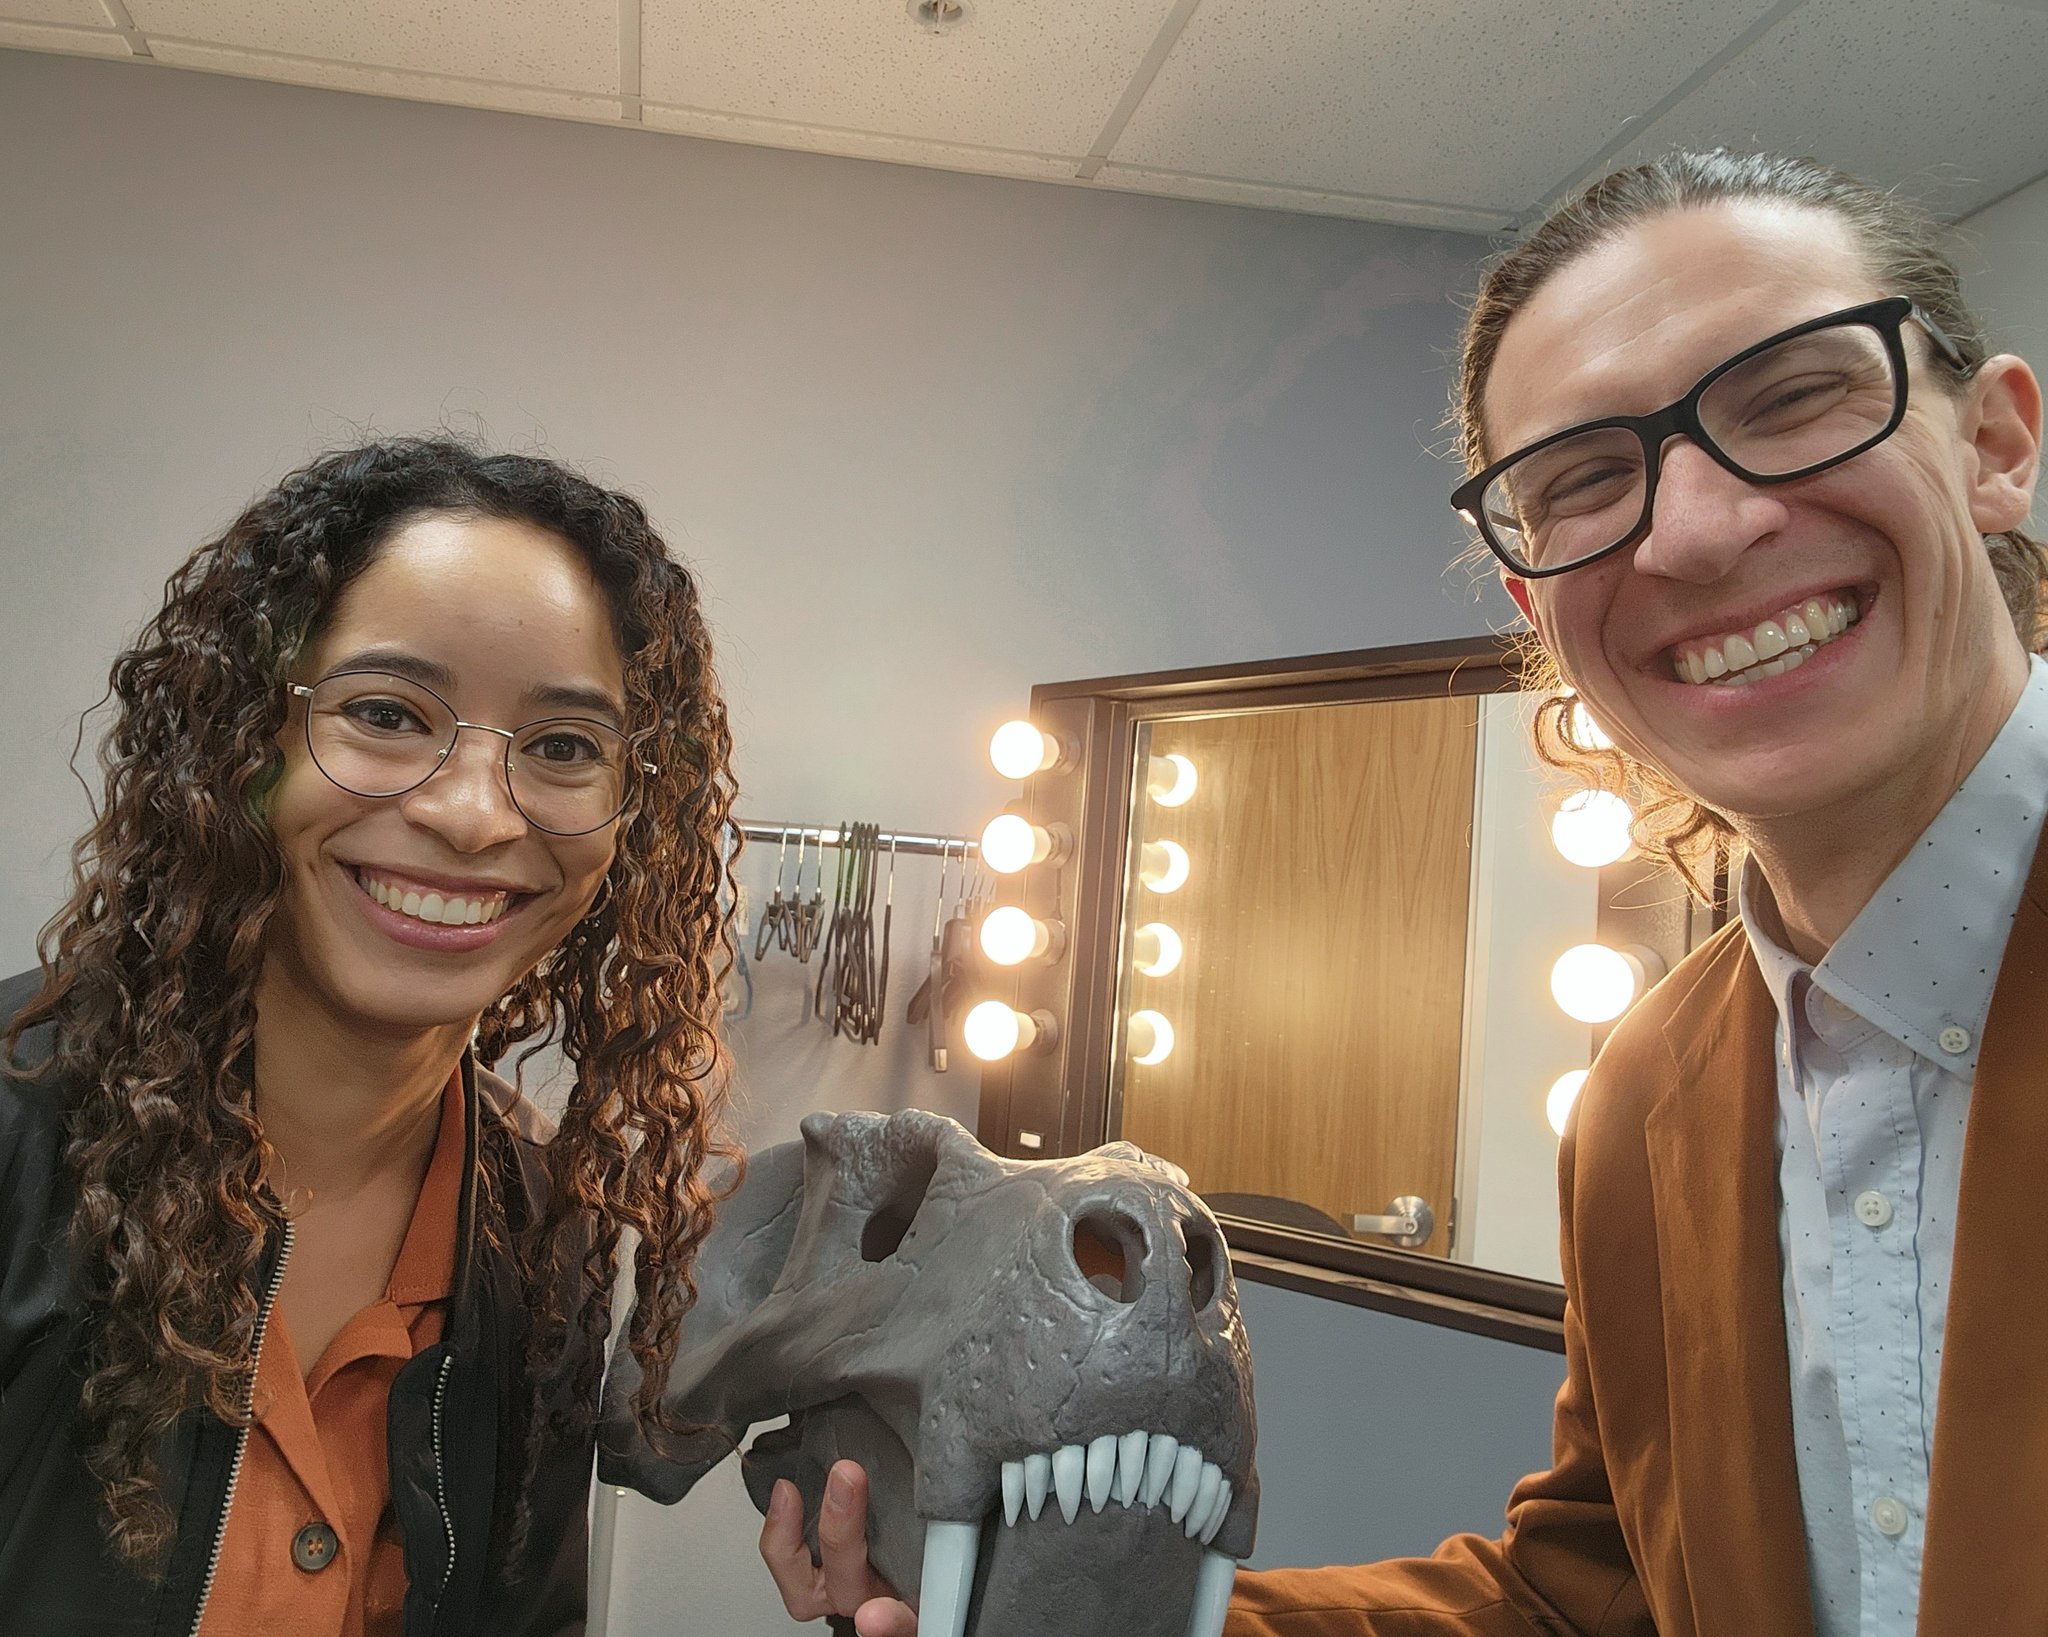 Brandon Peecock and Kiersten Pormoso pose for a photo in the green room while filming Ancient Earth: Inferno